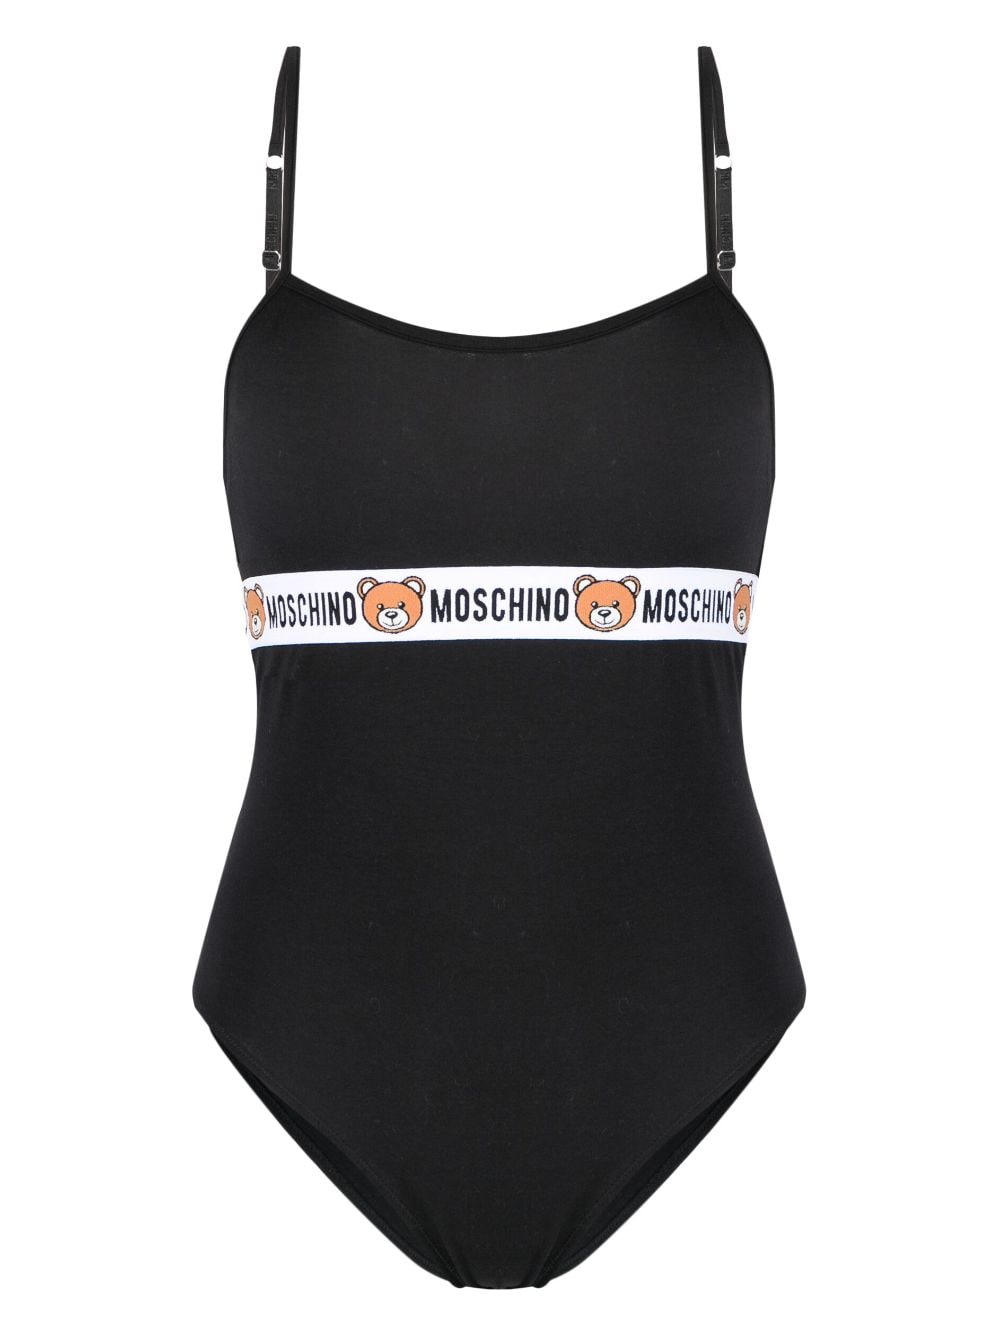 Moschino Women's Body Suit A4203 5577 1001 - Hydraulics Stores